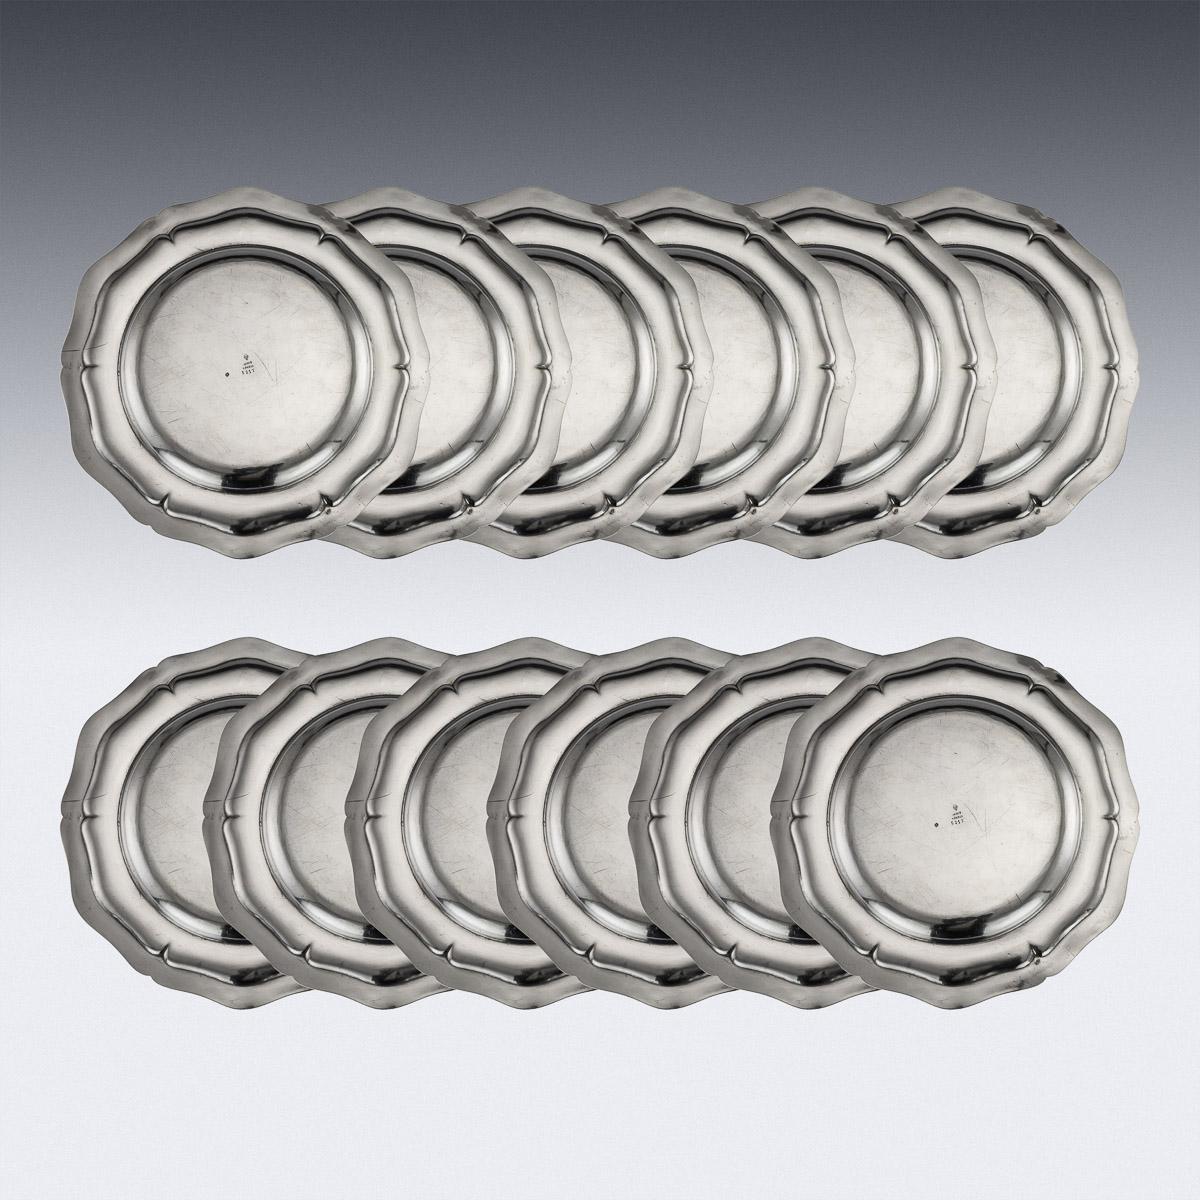 Antique 19th century French rare and important set of twelve solid silver dinner plates, each of shaped-circular form with ovolo borders. Engraved with the important Melzi family crest (Francesco Melzi, circa 1491-1568/70 was an Italian painter born